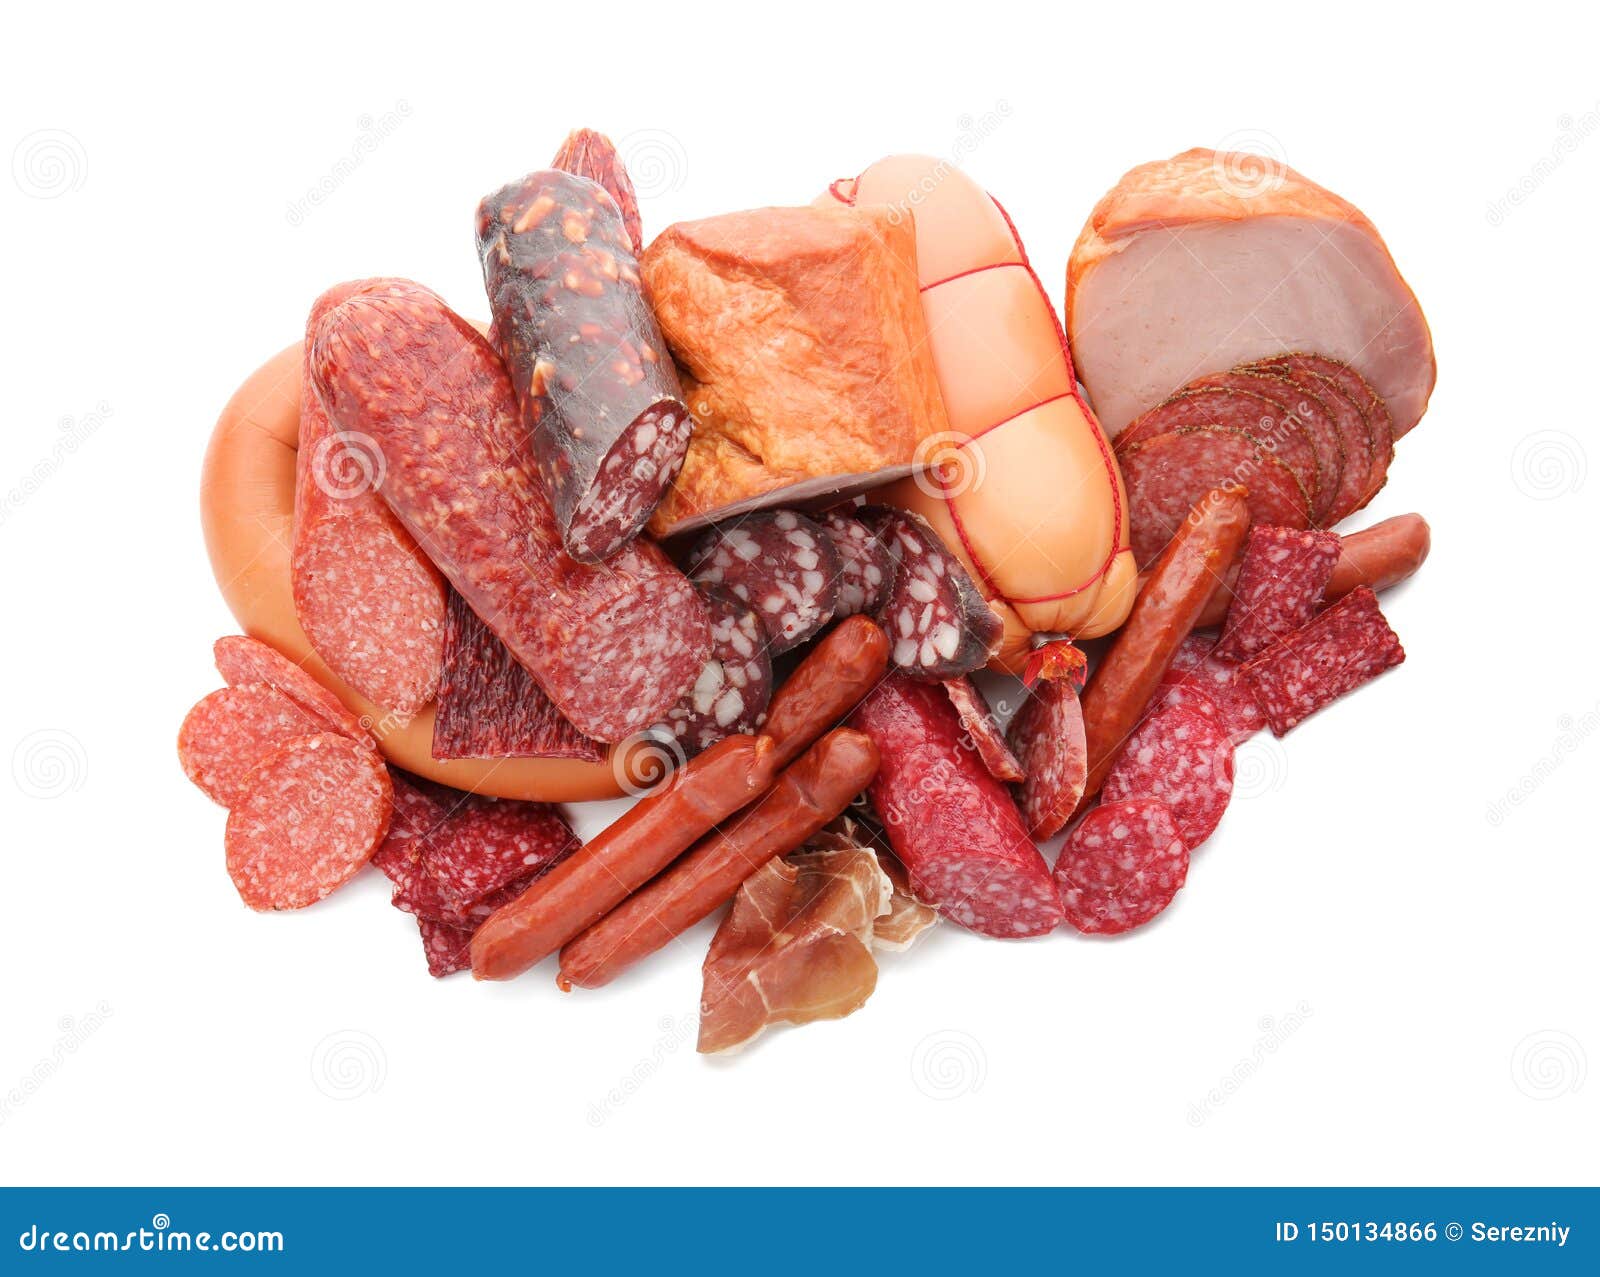 assortment of delicious deli meats on white background